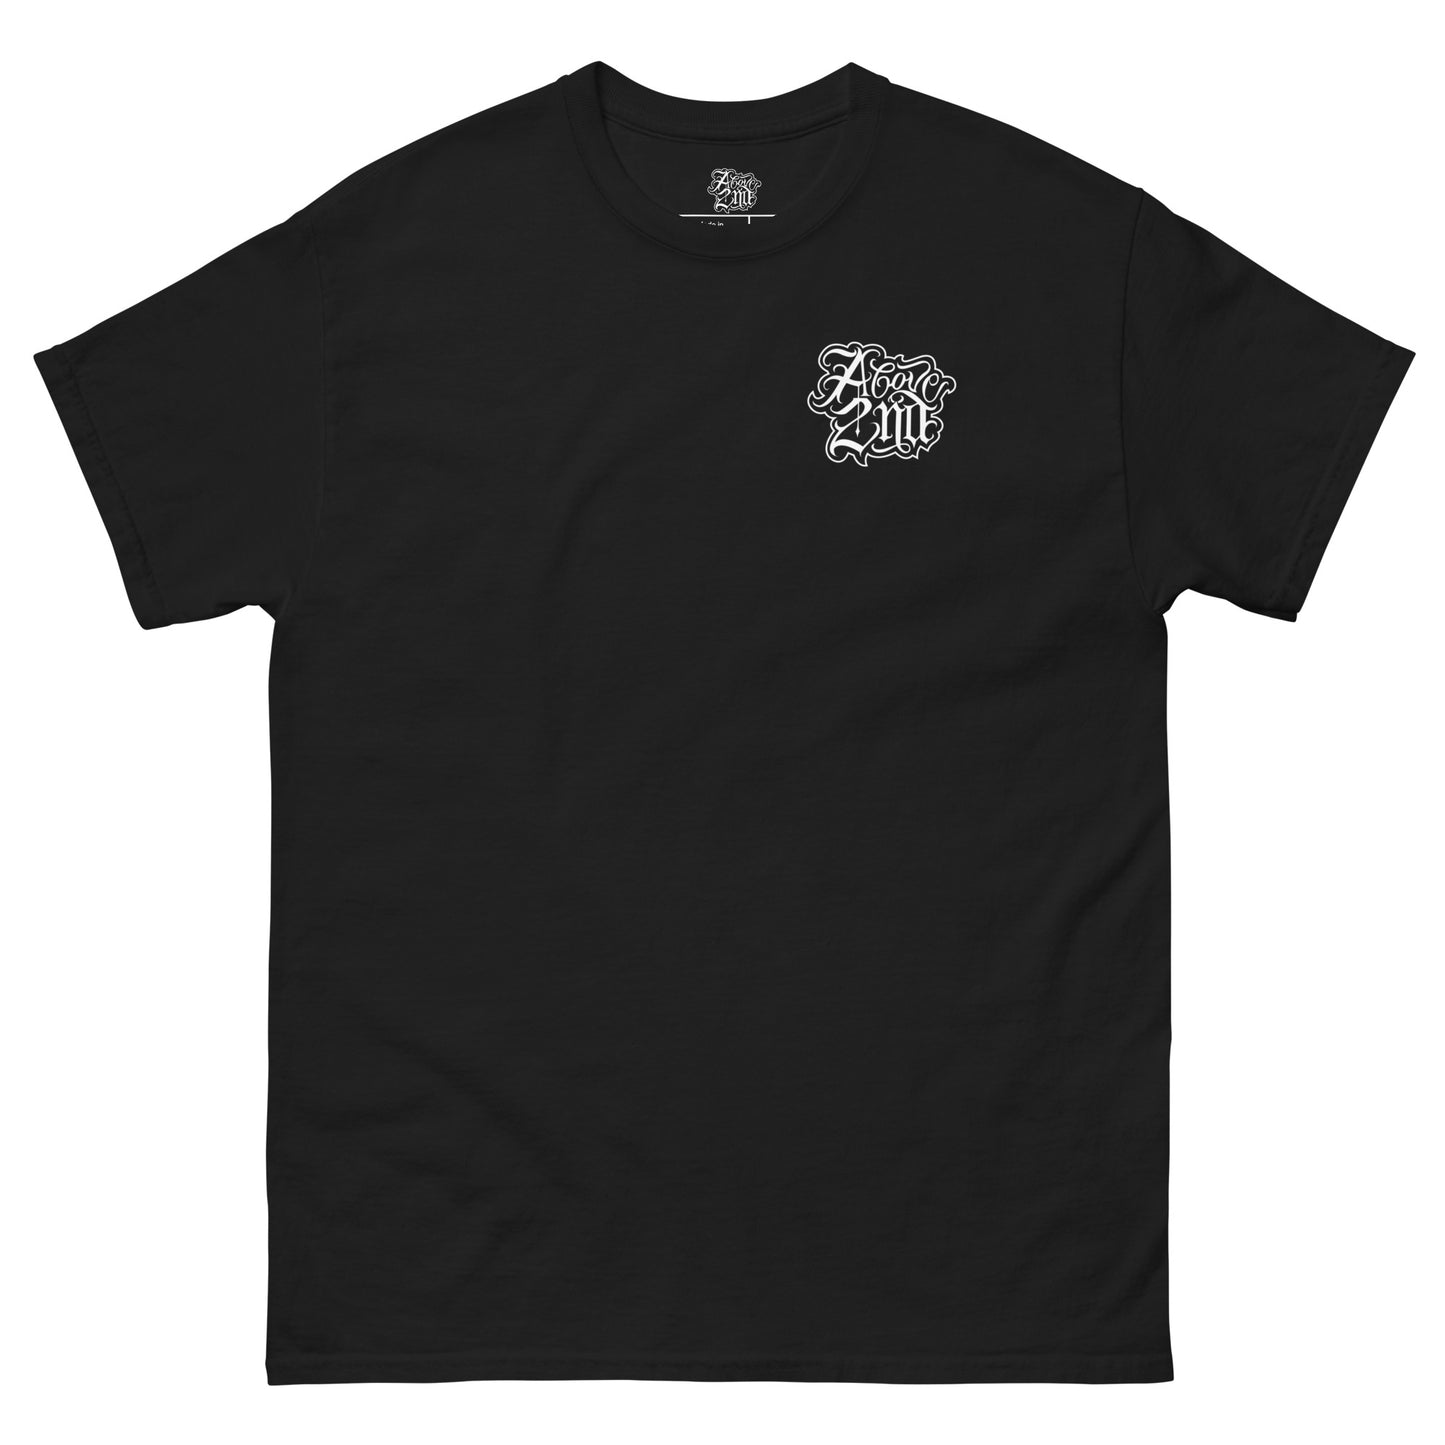 Above2nd 5 Core Men's classic tee